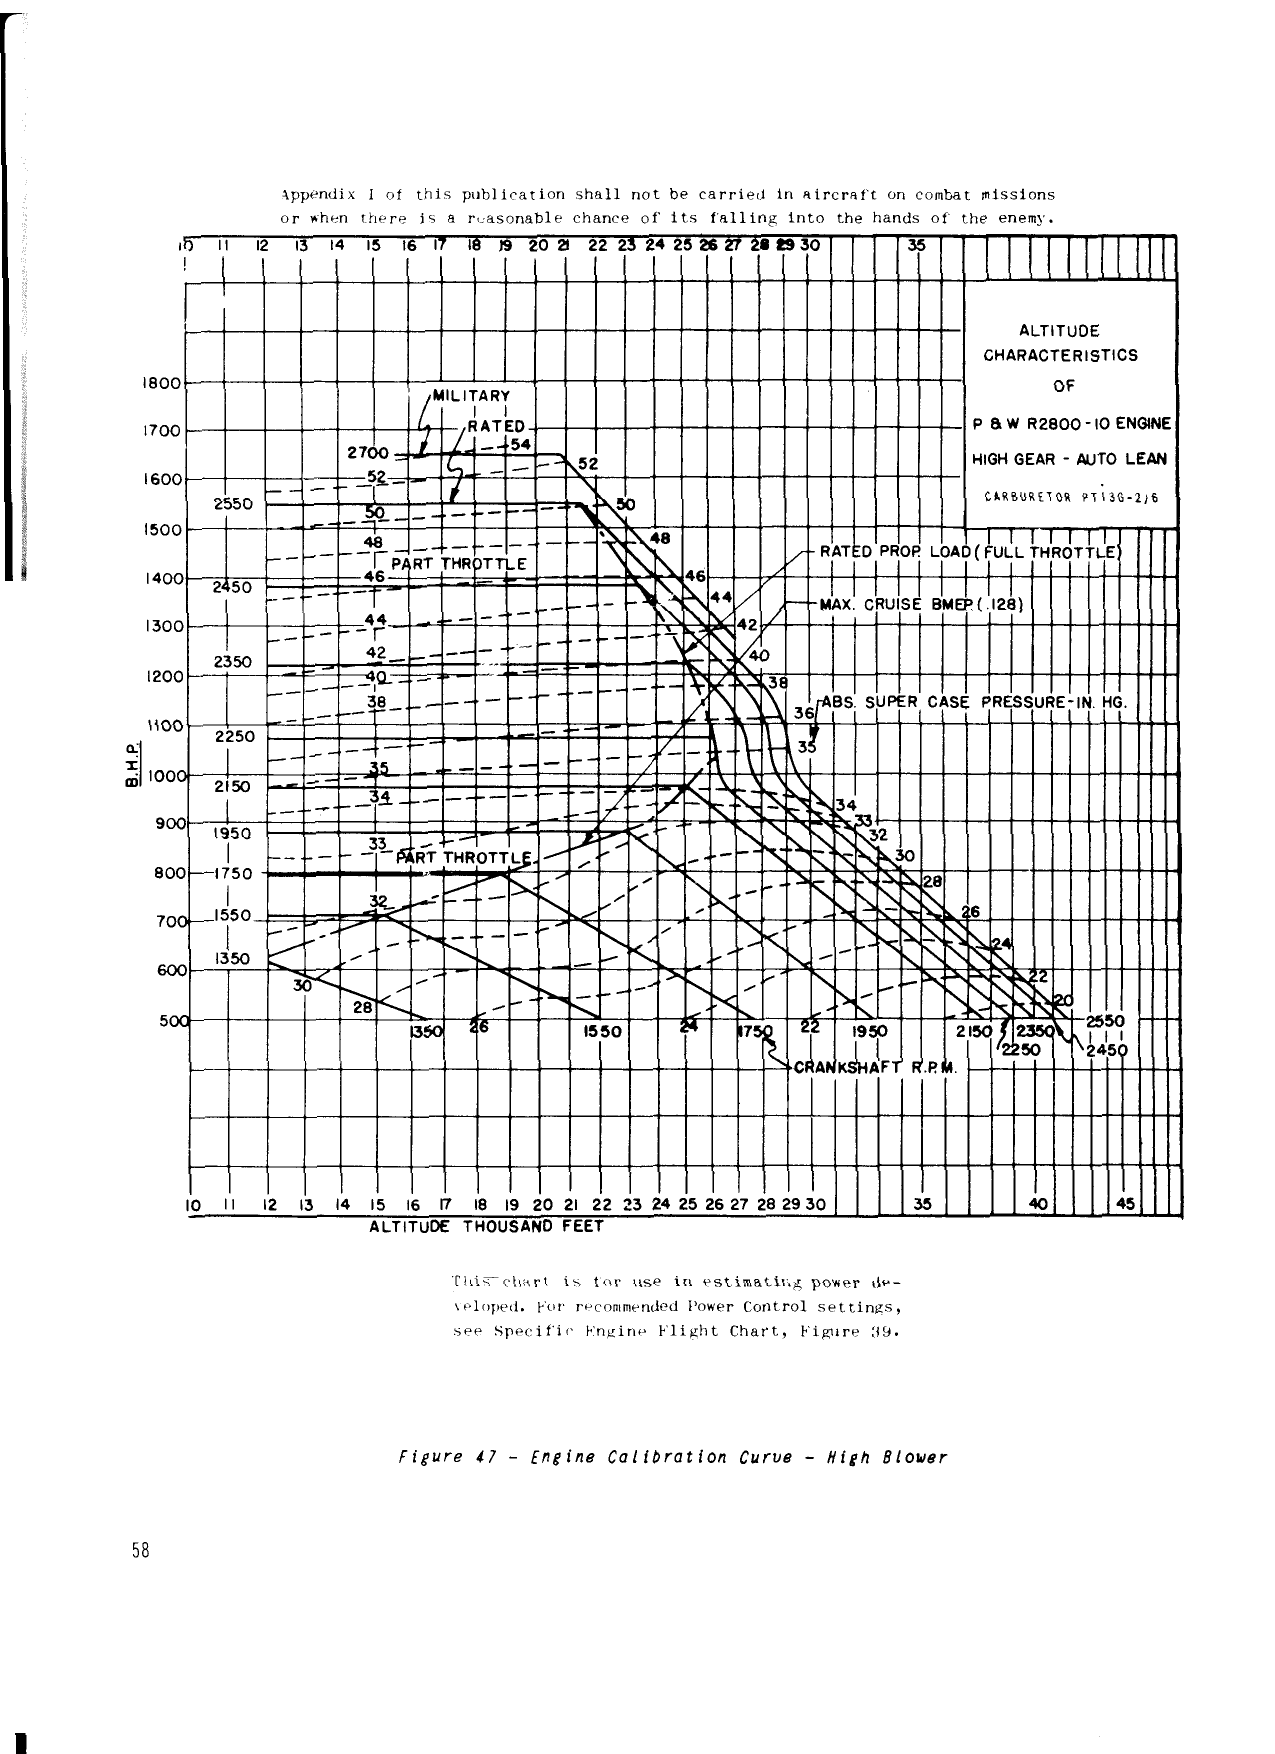 Sample page 55 from AirCorps Library document: Pilot's Handbook - F6F-3, -3N, -5, -5N